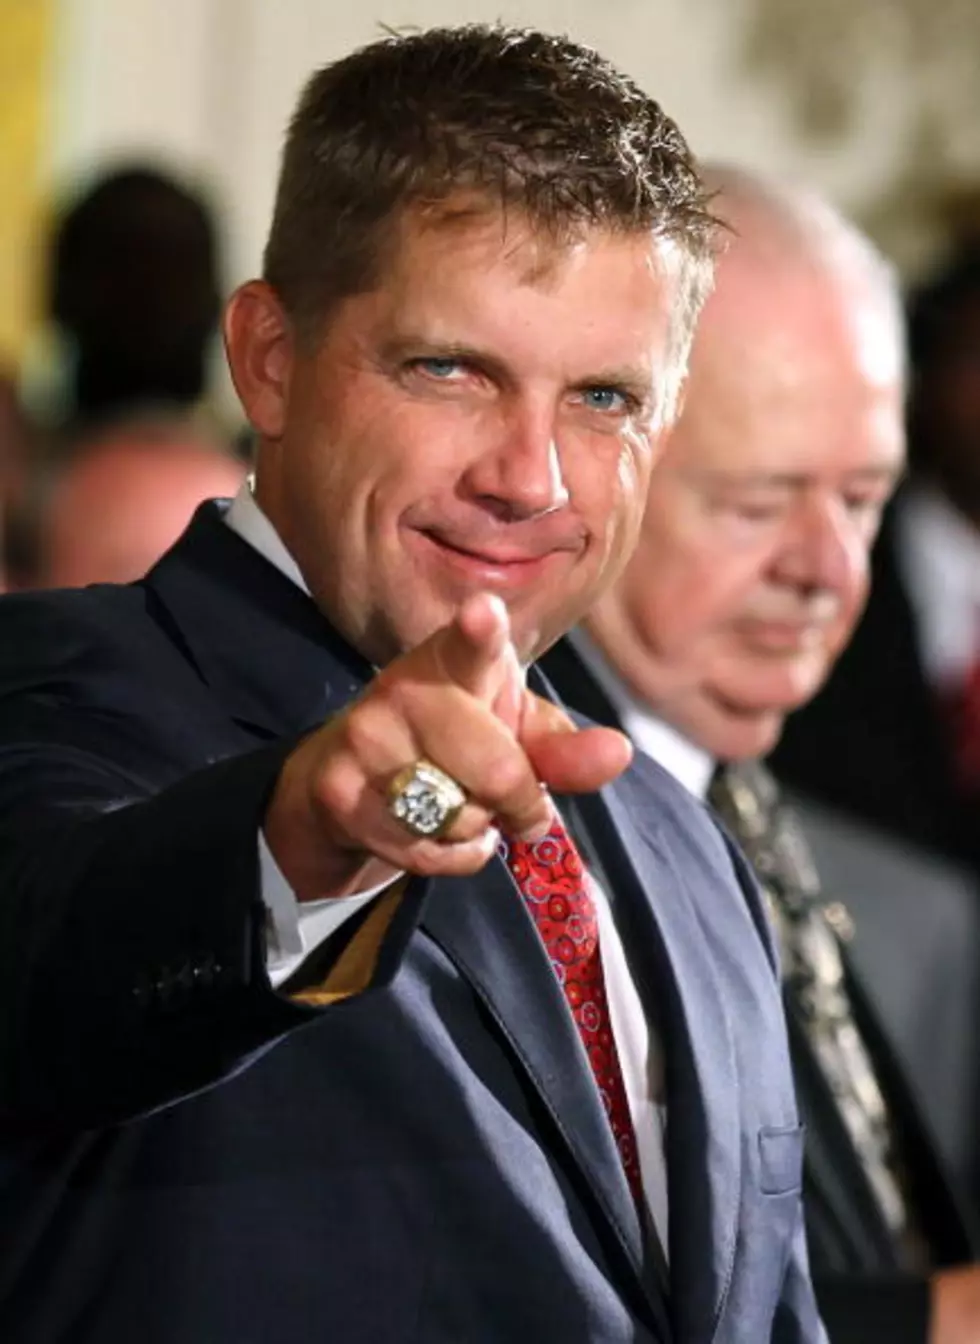 Sean Payton Makes First Public Comments Since Being Reinstated By The NFL After Bountygate Allegations